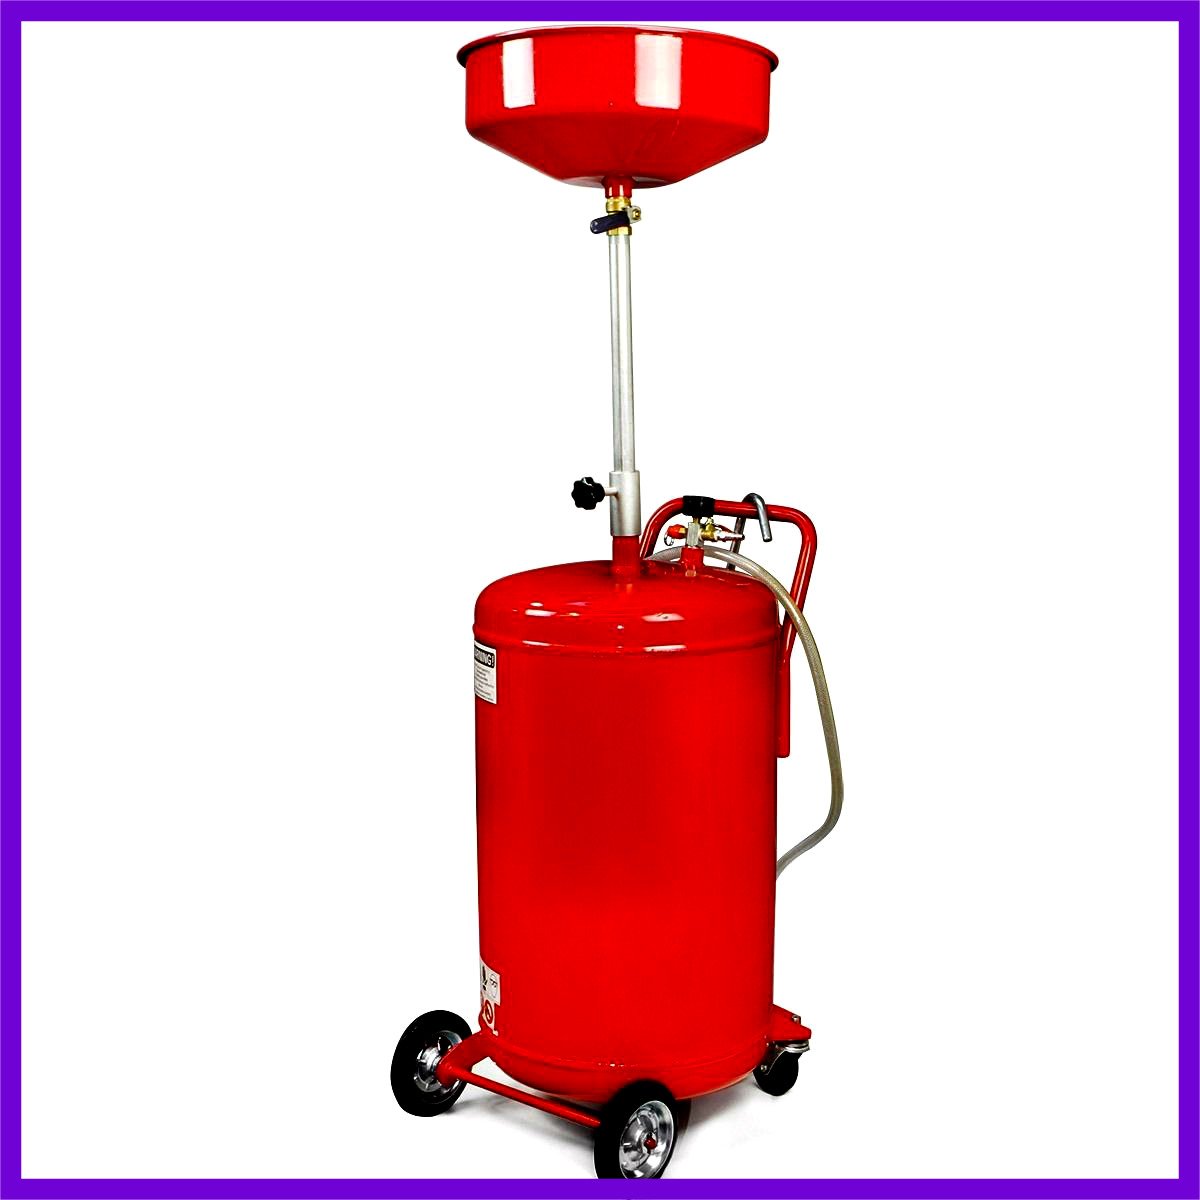 Portable Oil Drain Tank Container 20 Gallon Waste Air Operated Drainer Drainage Lift Auto